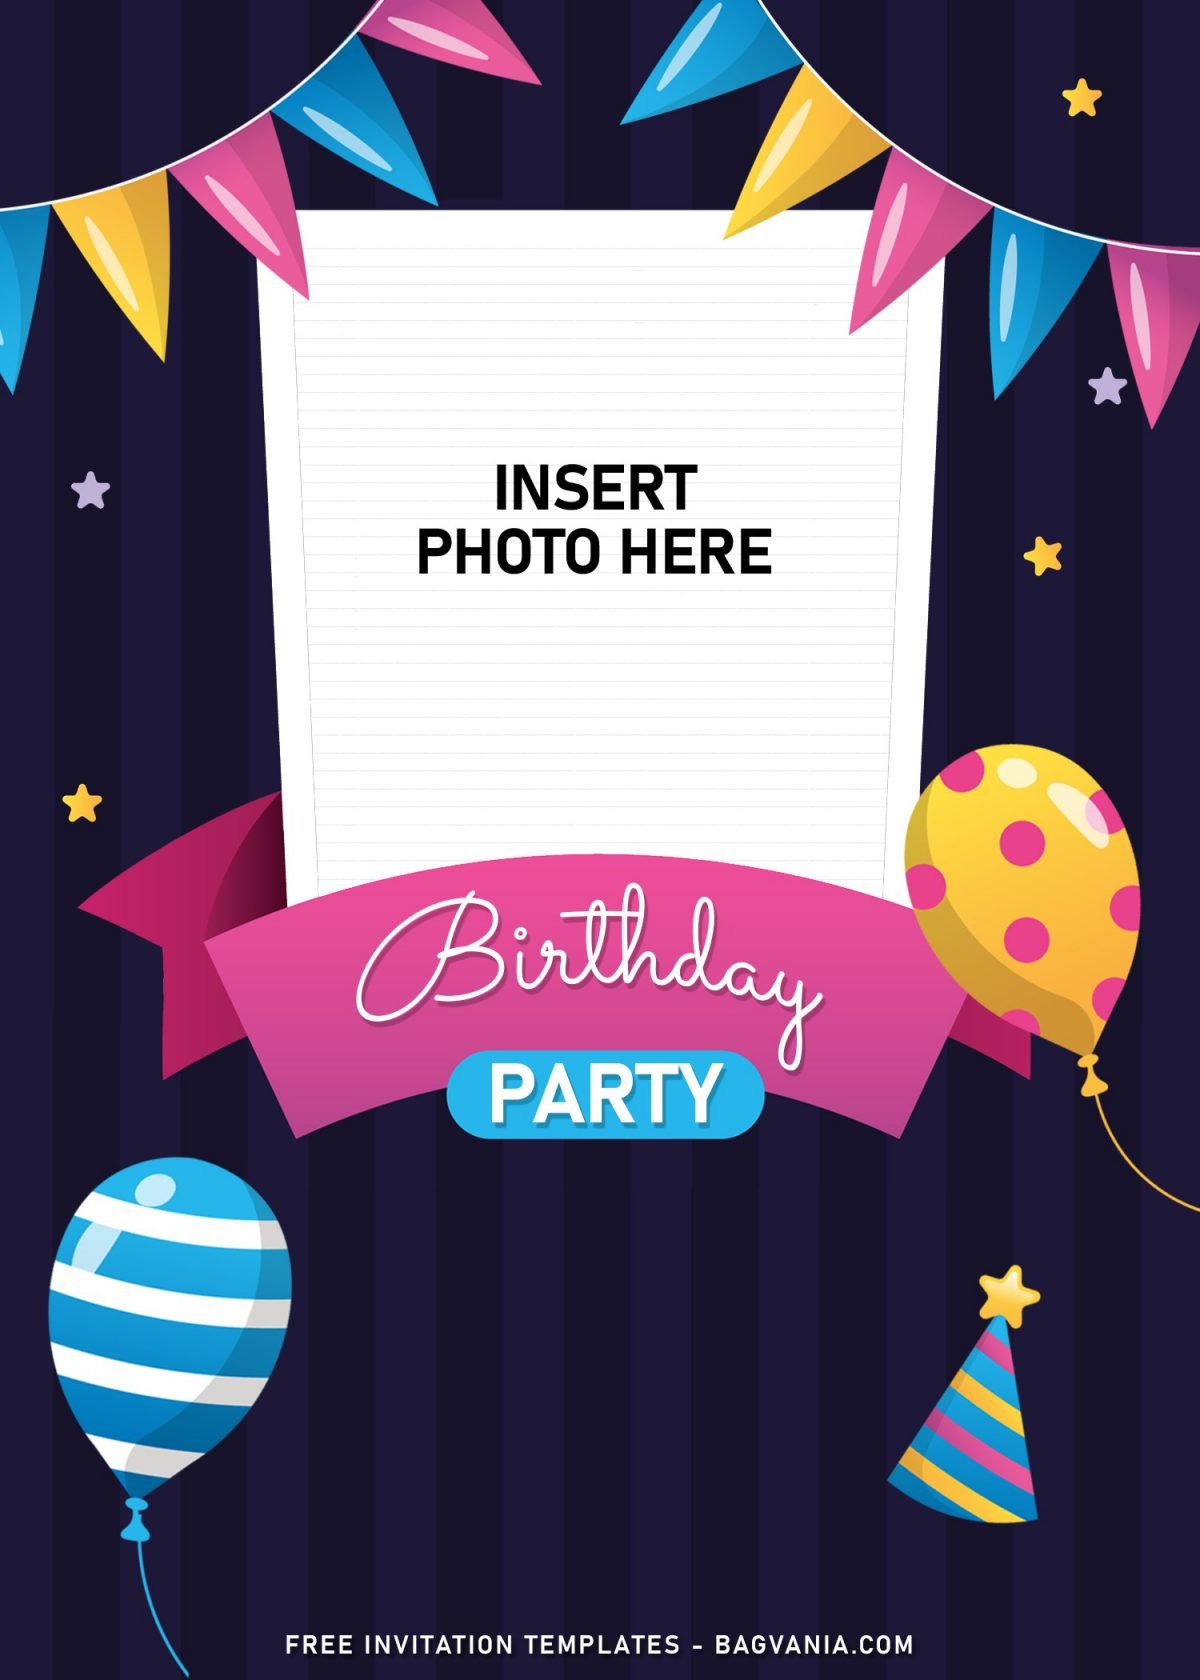 11+ Fun Birthday Invitation Templates For Your Kid’s Upcoming Birthday Party and has photo or picture frame